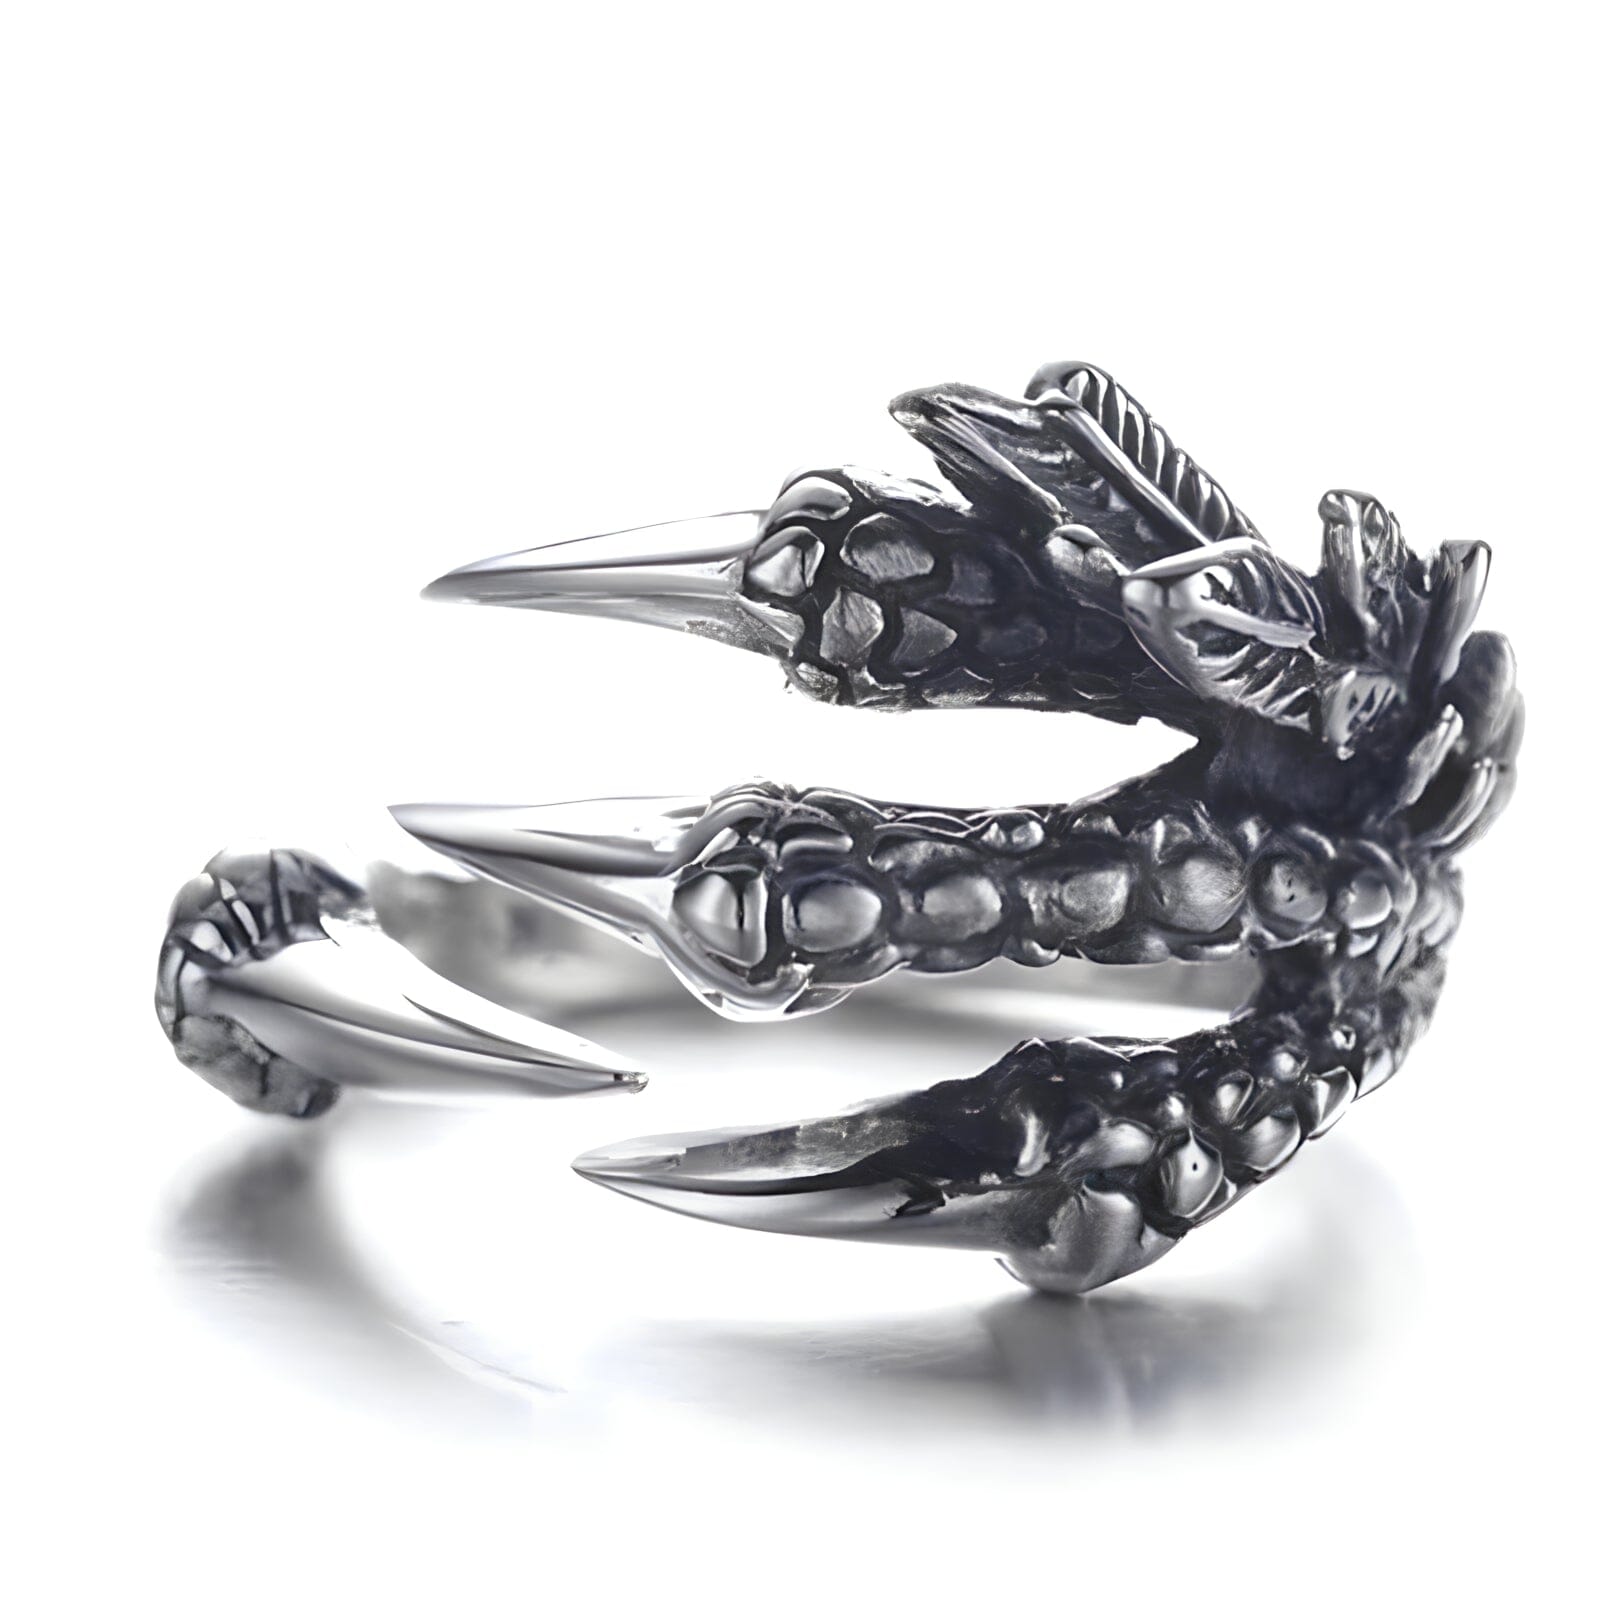 The Dragon's Claw Ring